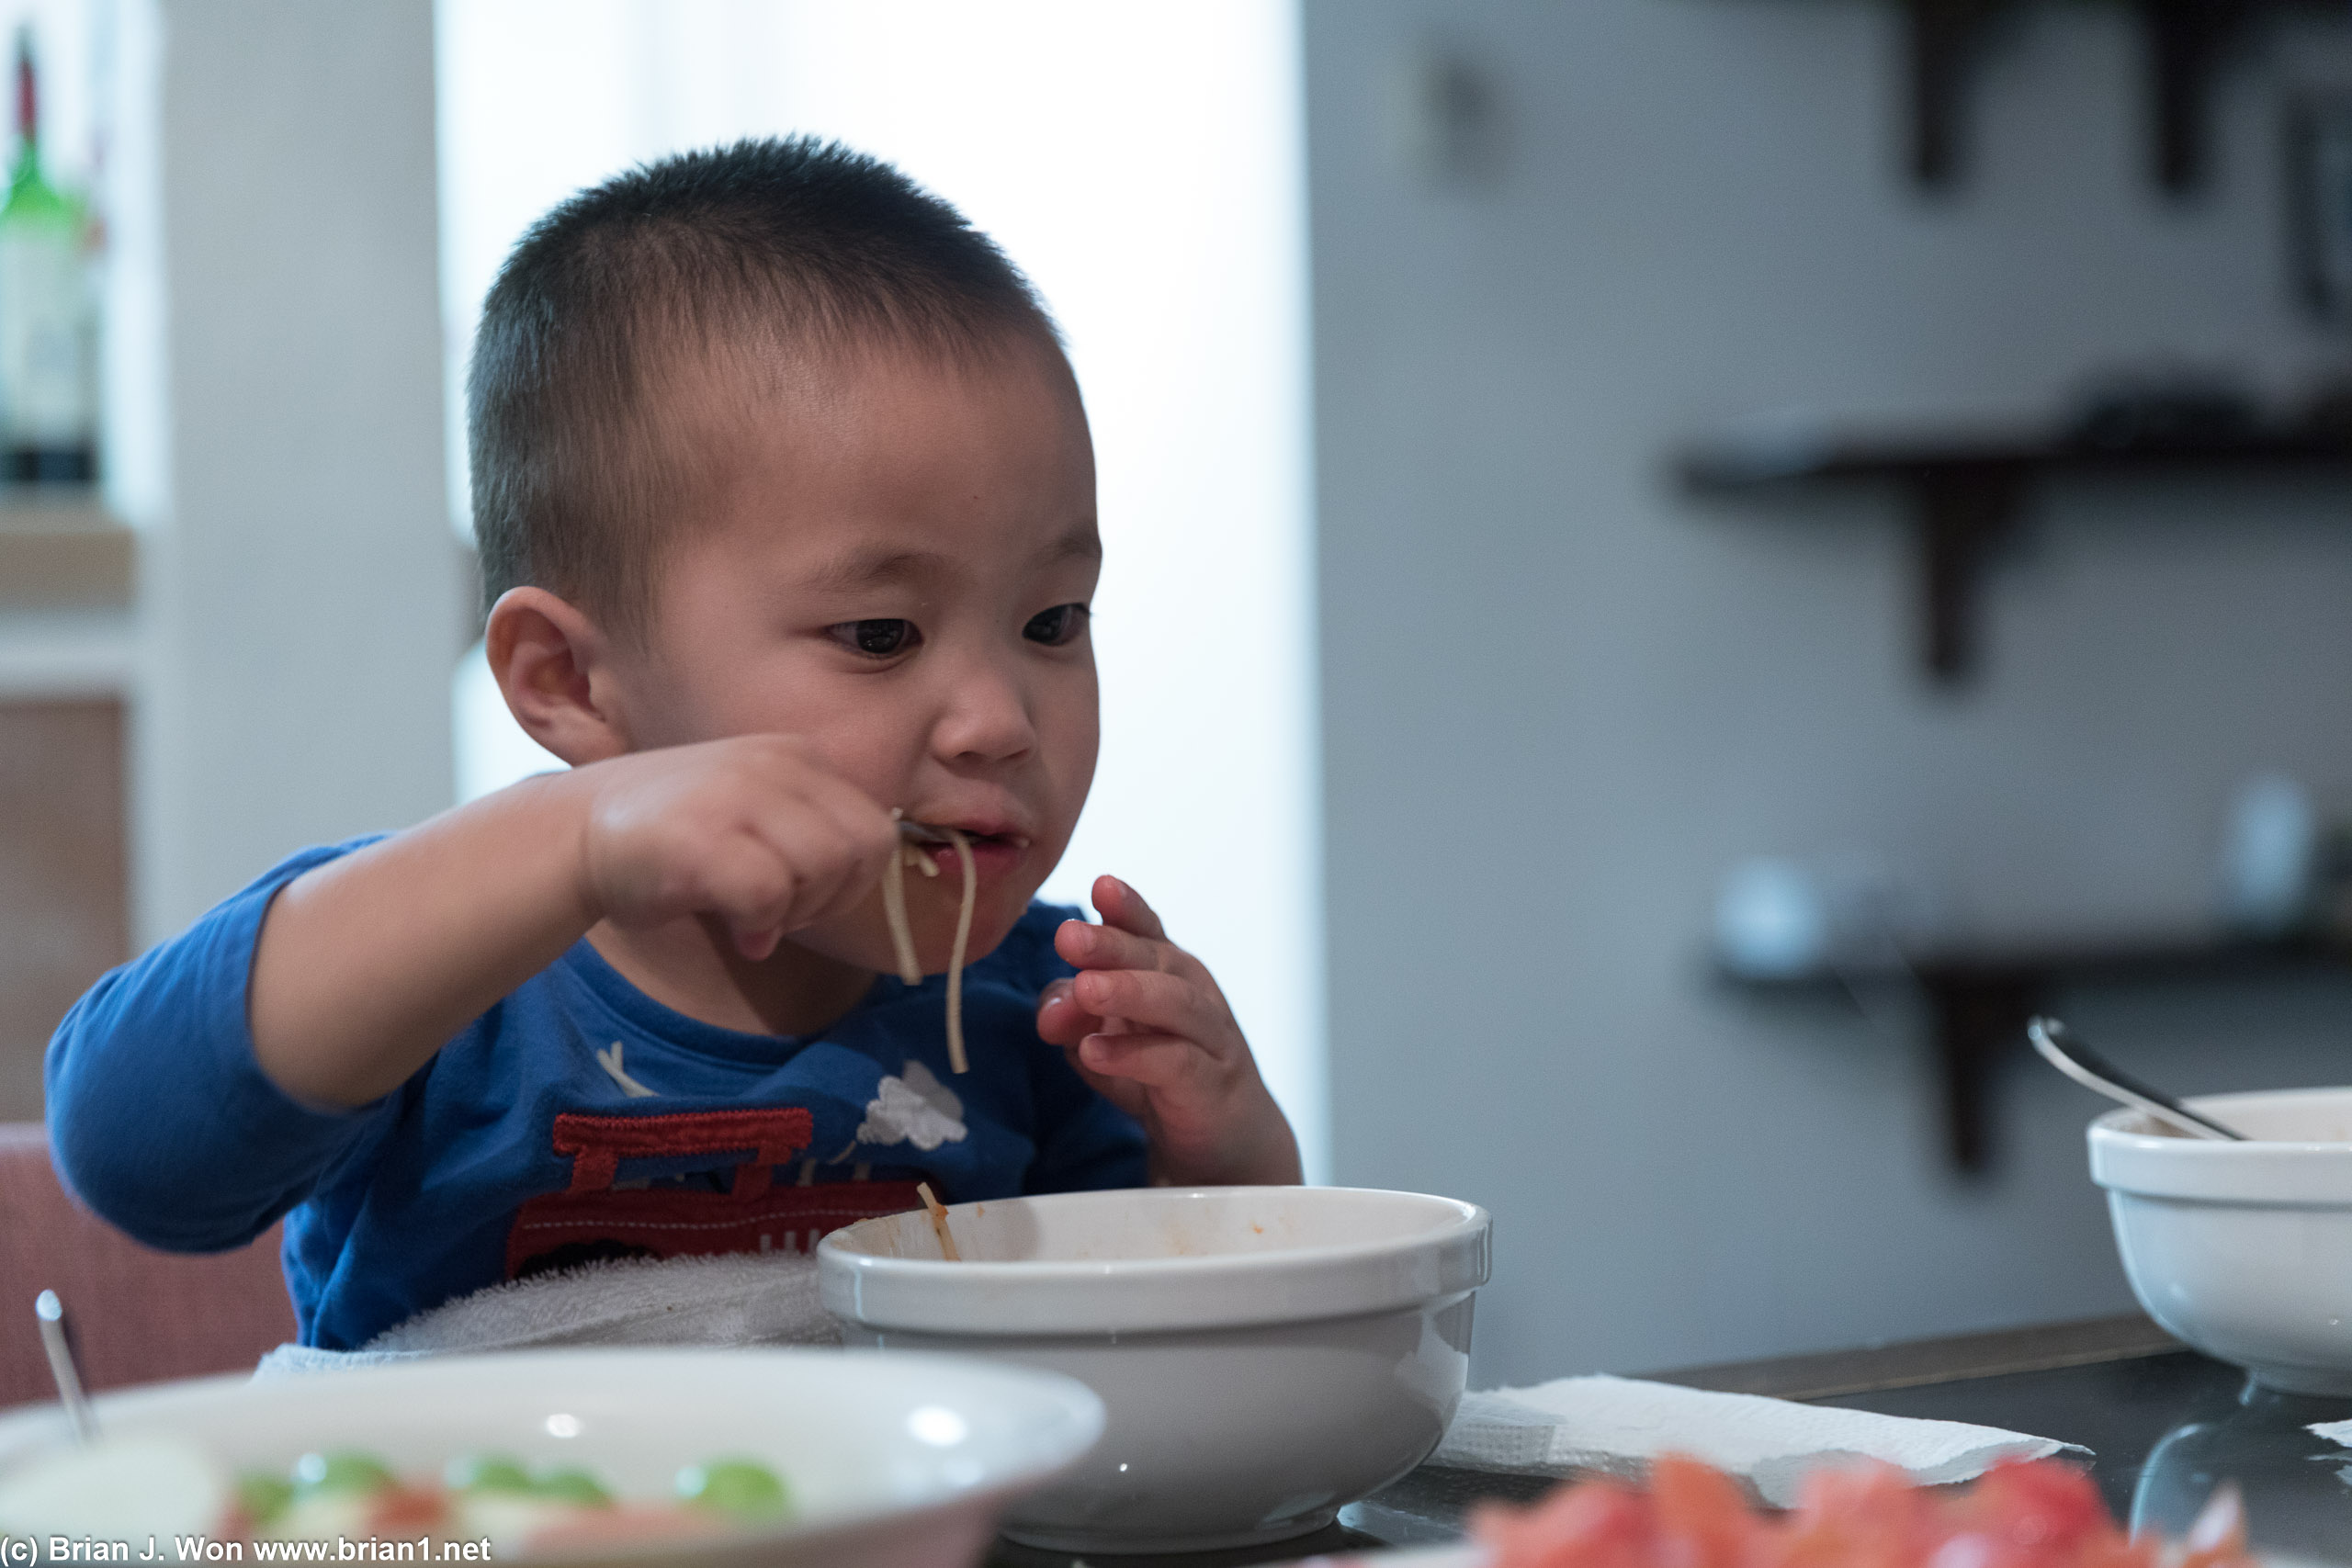 Well-fed kid loves noodles.